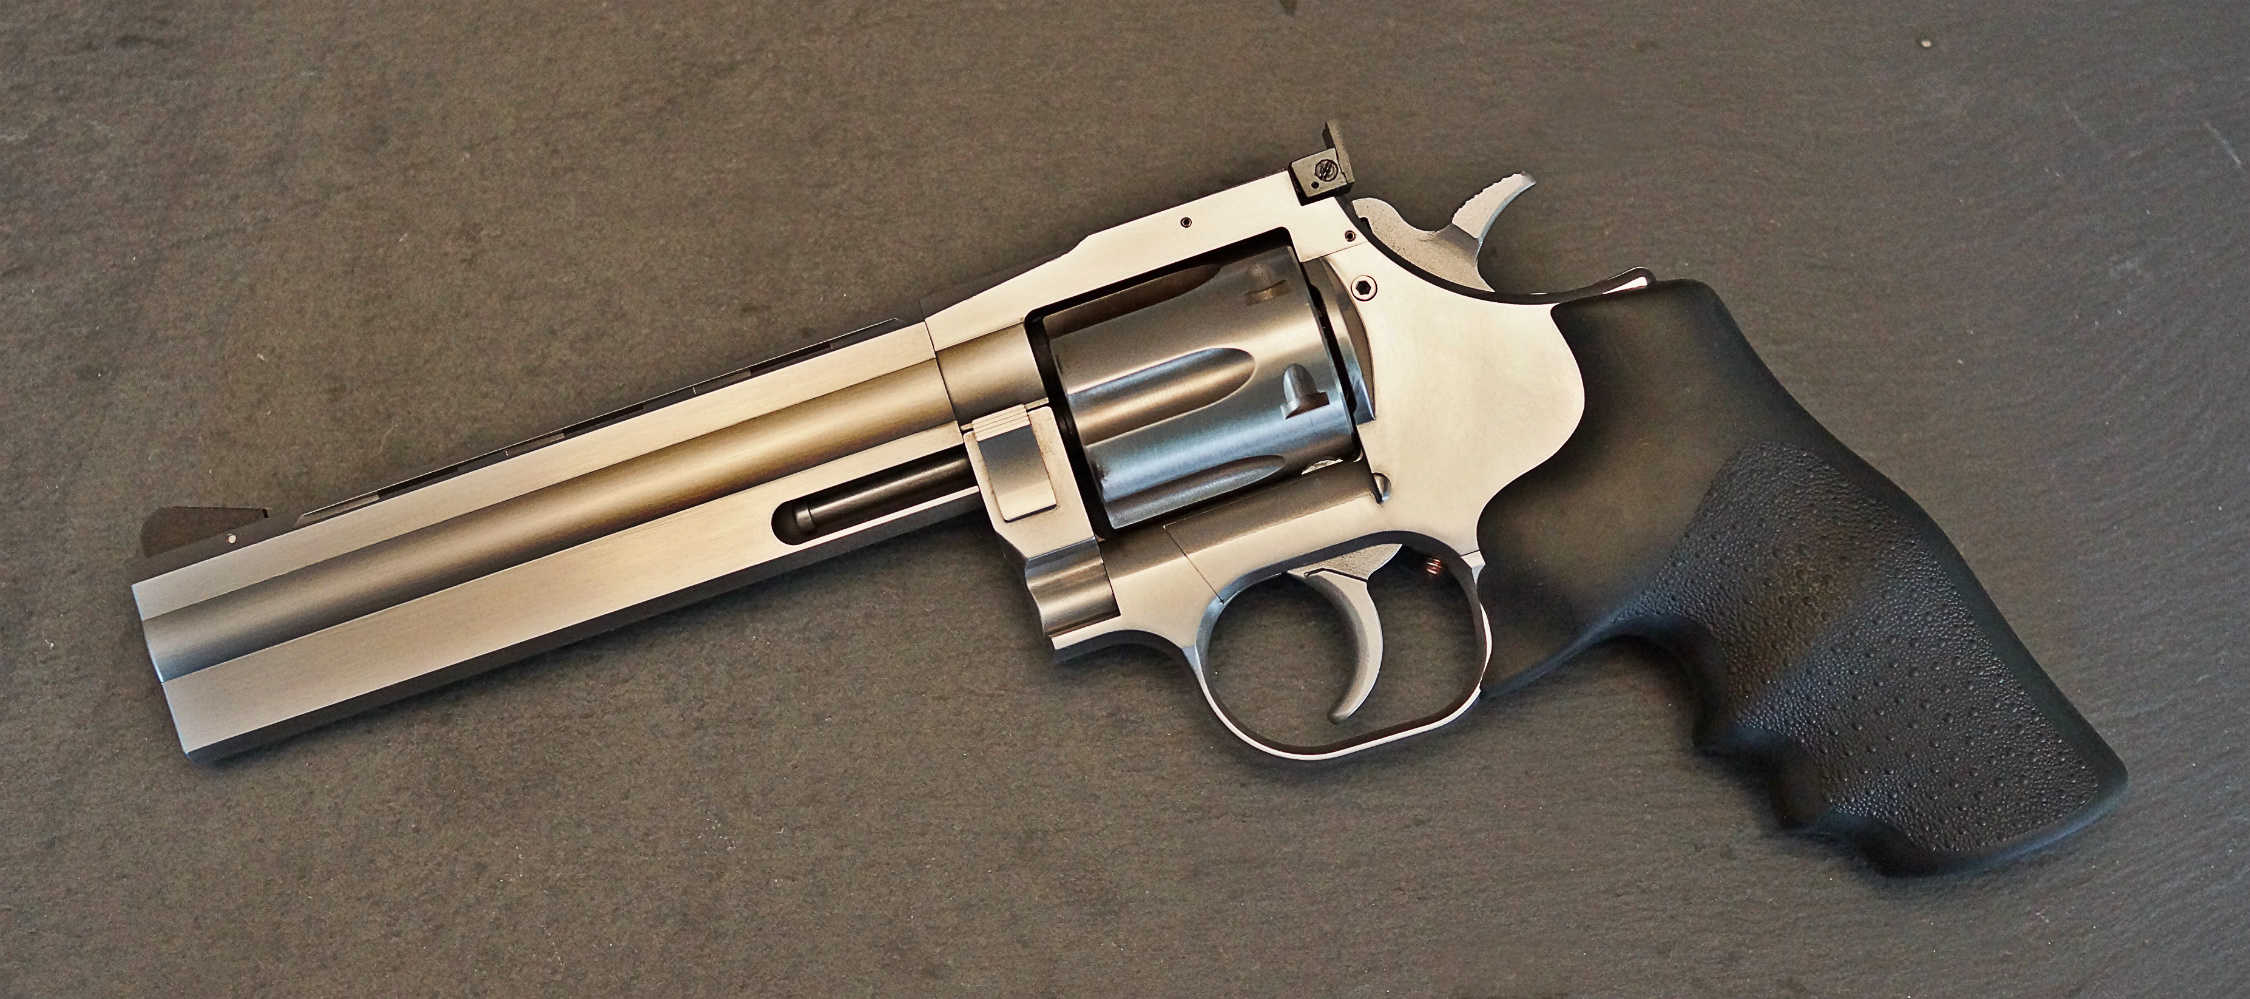 Amazing Dan Wesson 357 Magnum Revolver Pictures & Backgrounds